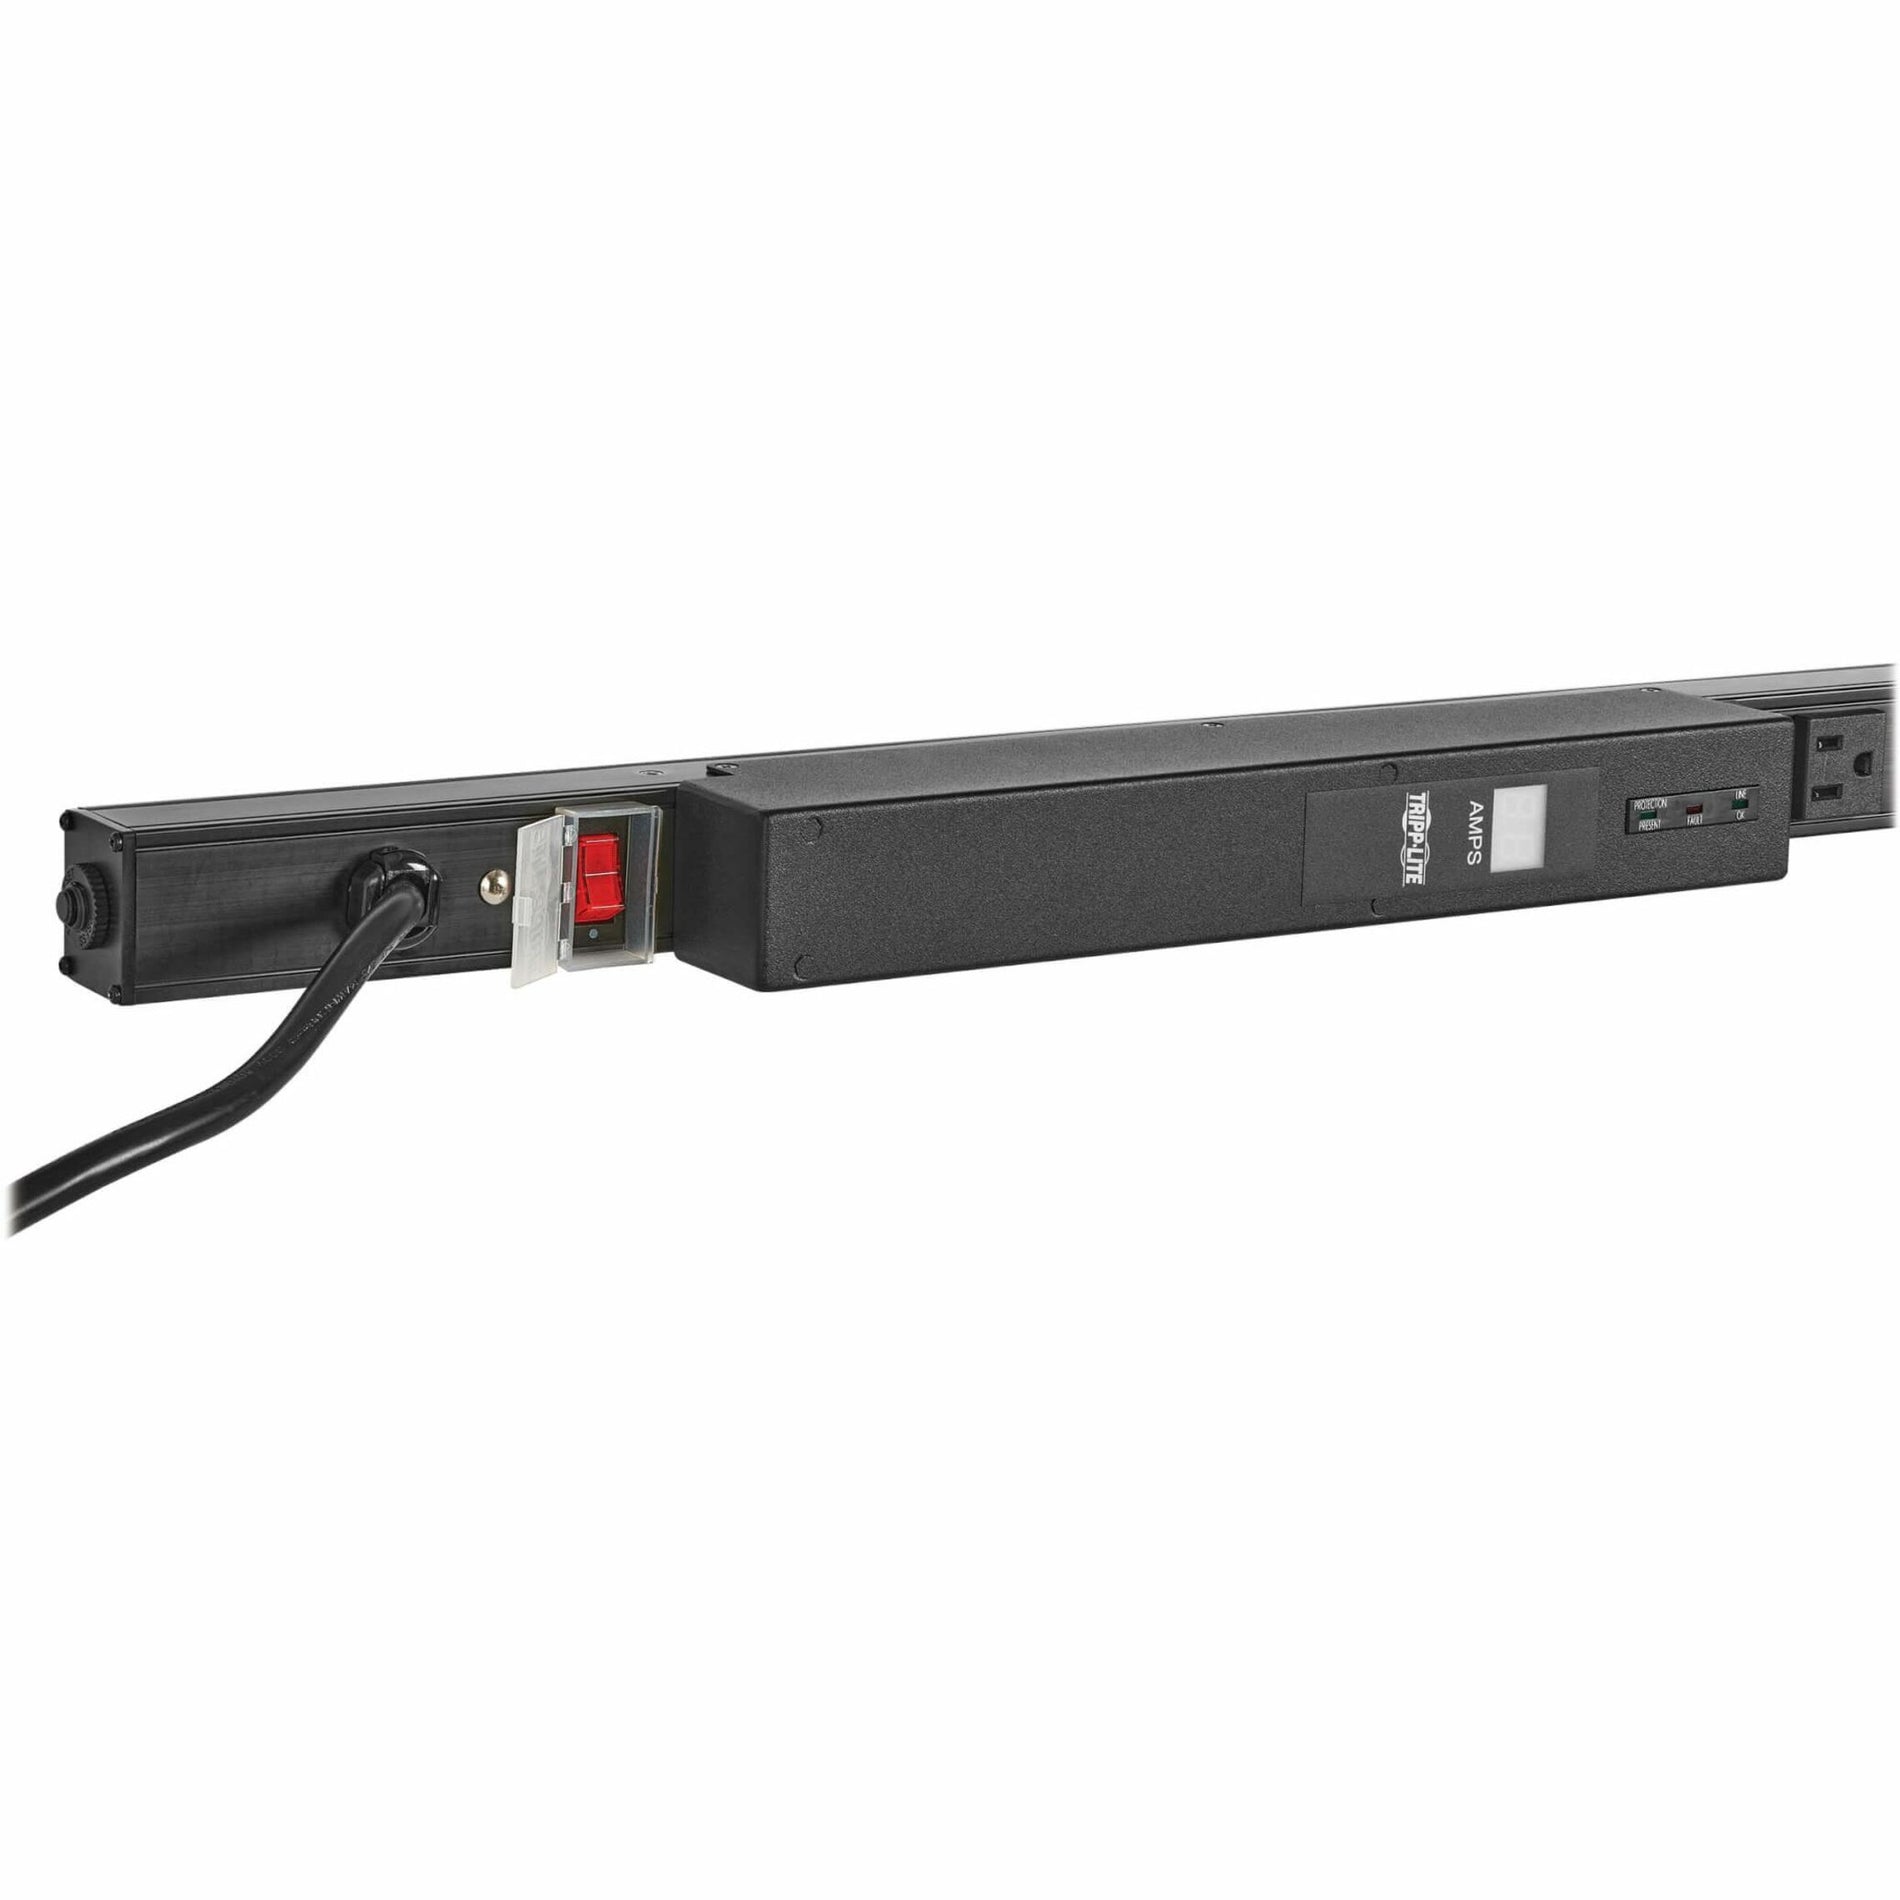 Tripp Lite PDUMV20-ISO 28-Outlets PDU, 120V AC, 1920W, Single Phase, Wall-mountable, RoHS Certified